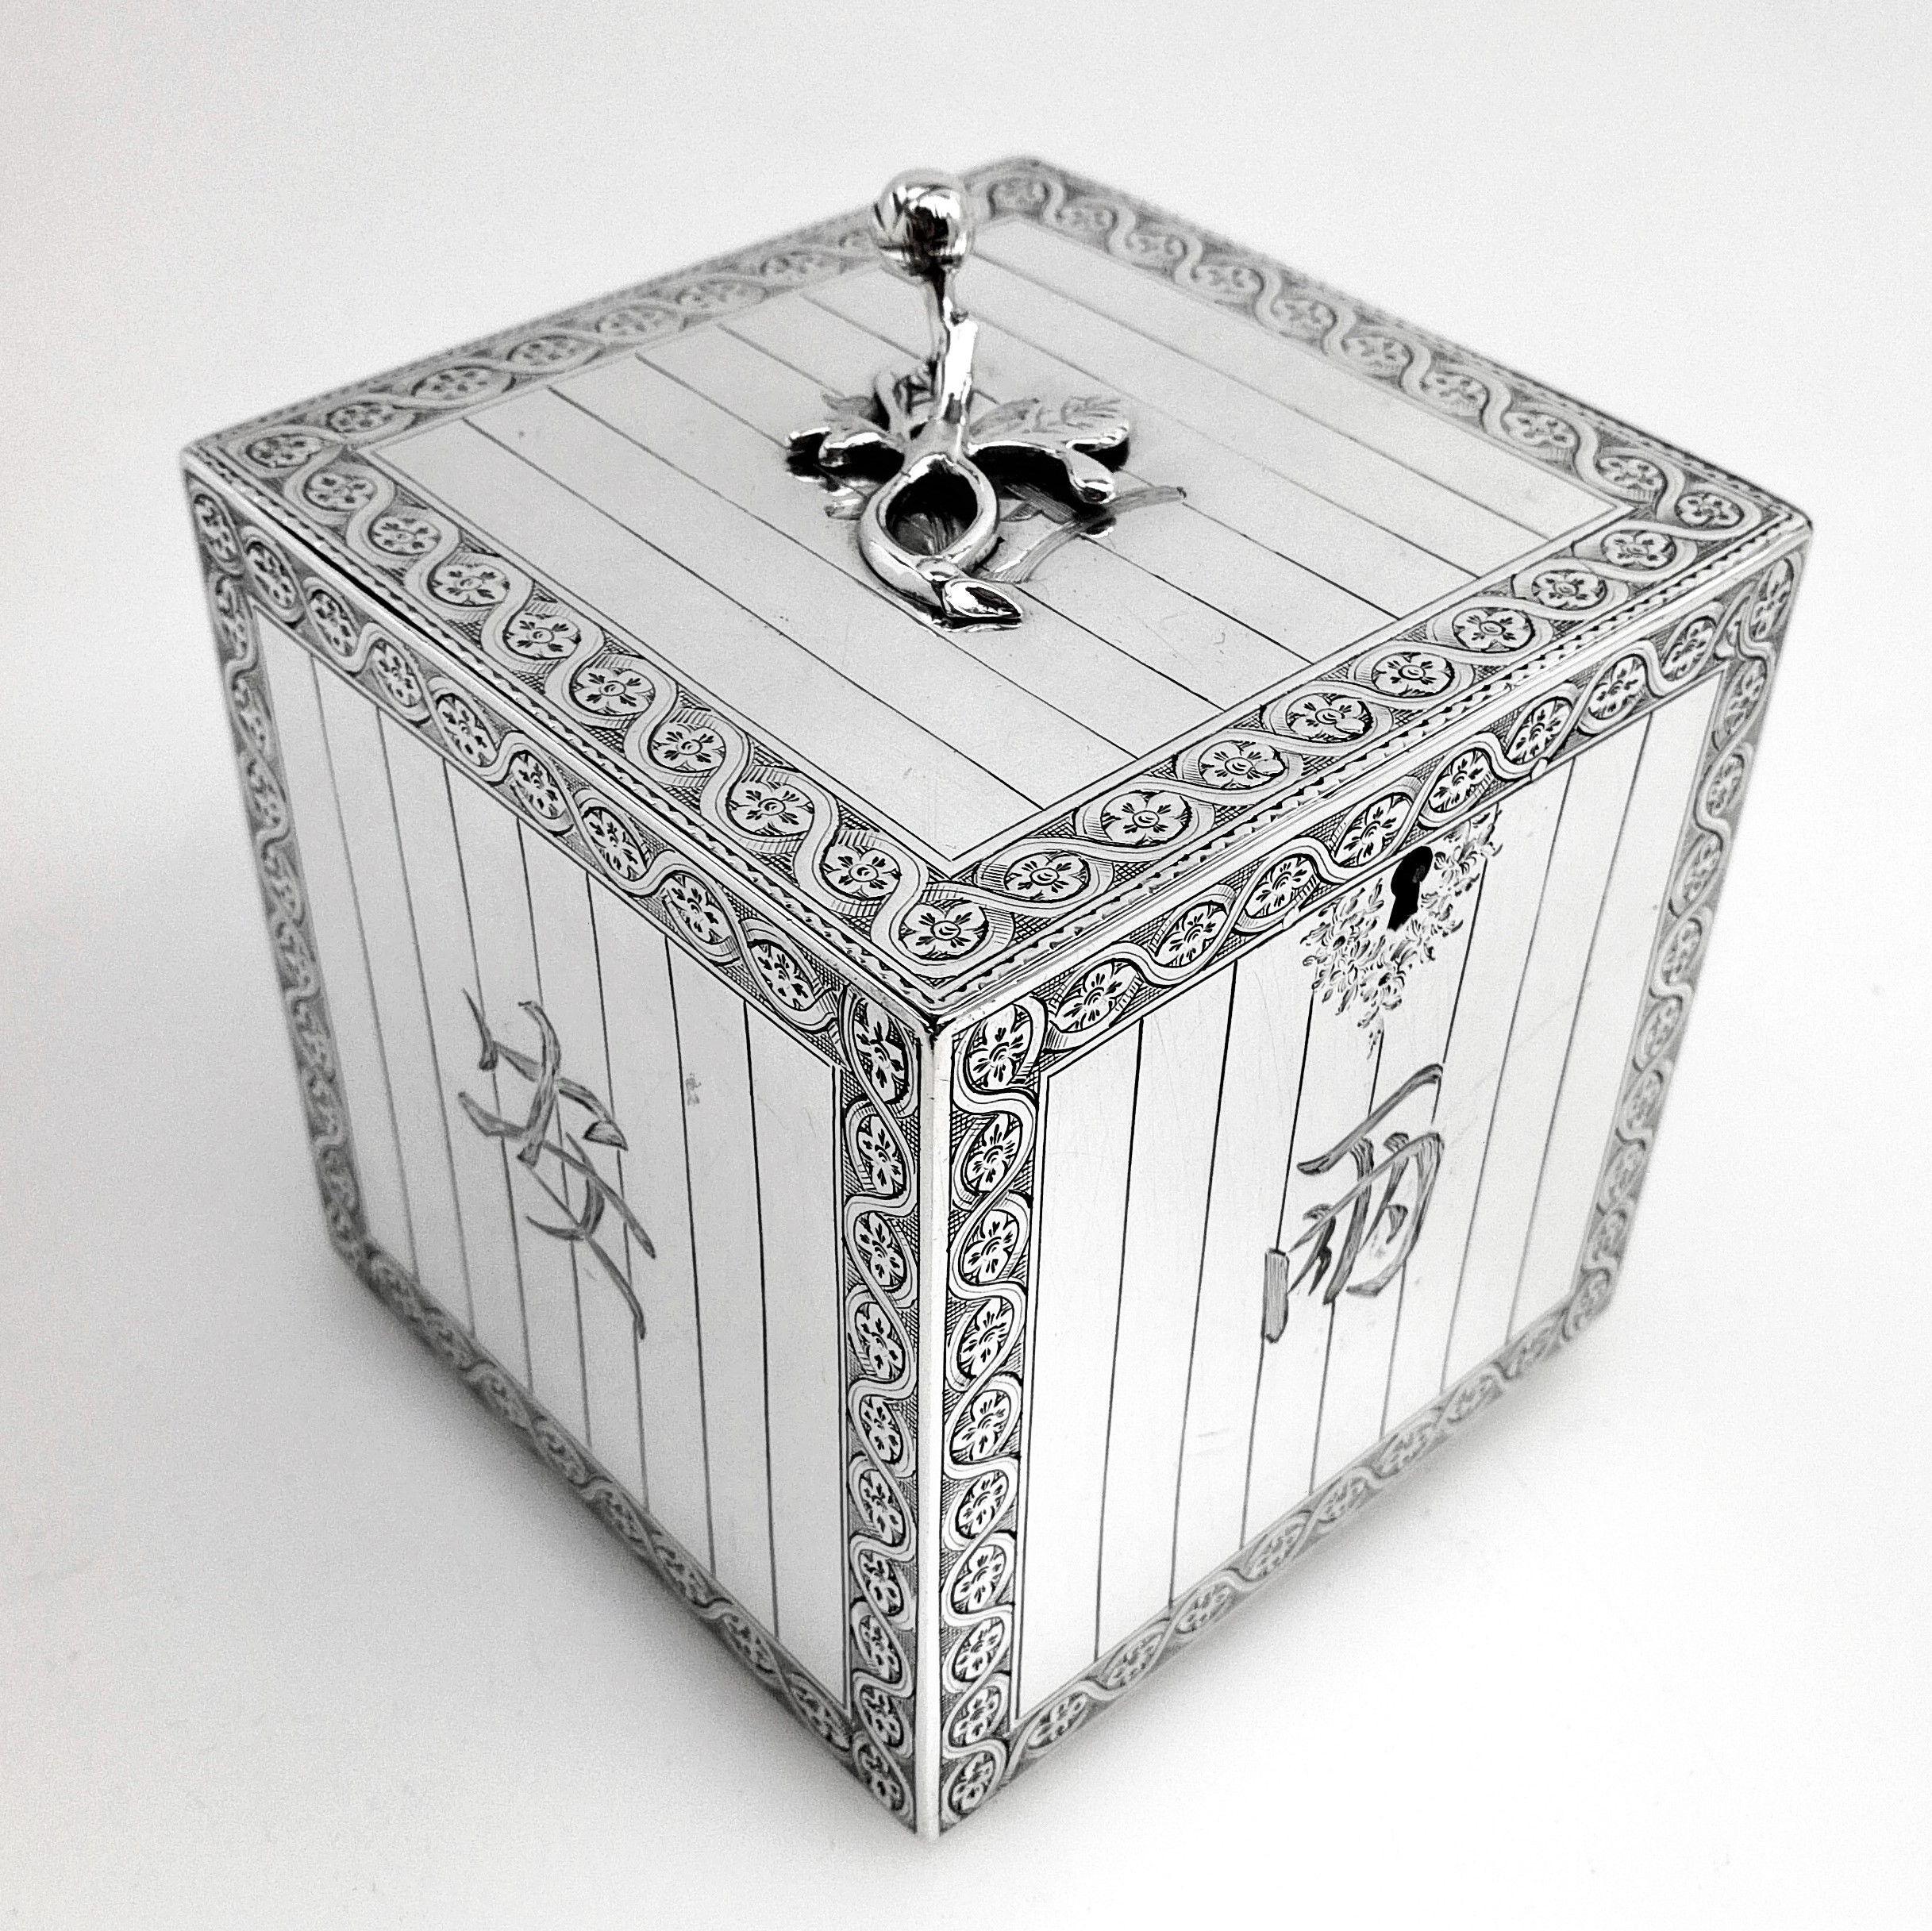 An unusual antique Georgian George III sterling silver tea caddy box in a clean, square form in the style of a traditional Chinese tea chest. Each of the exterior surfaces features an engraved silver border surrounding stylized 'plank' designs. Each